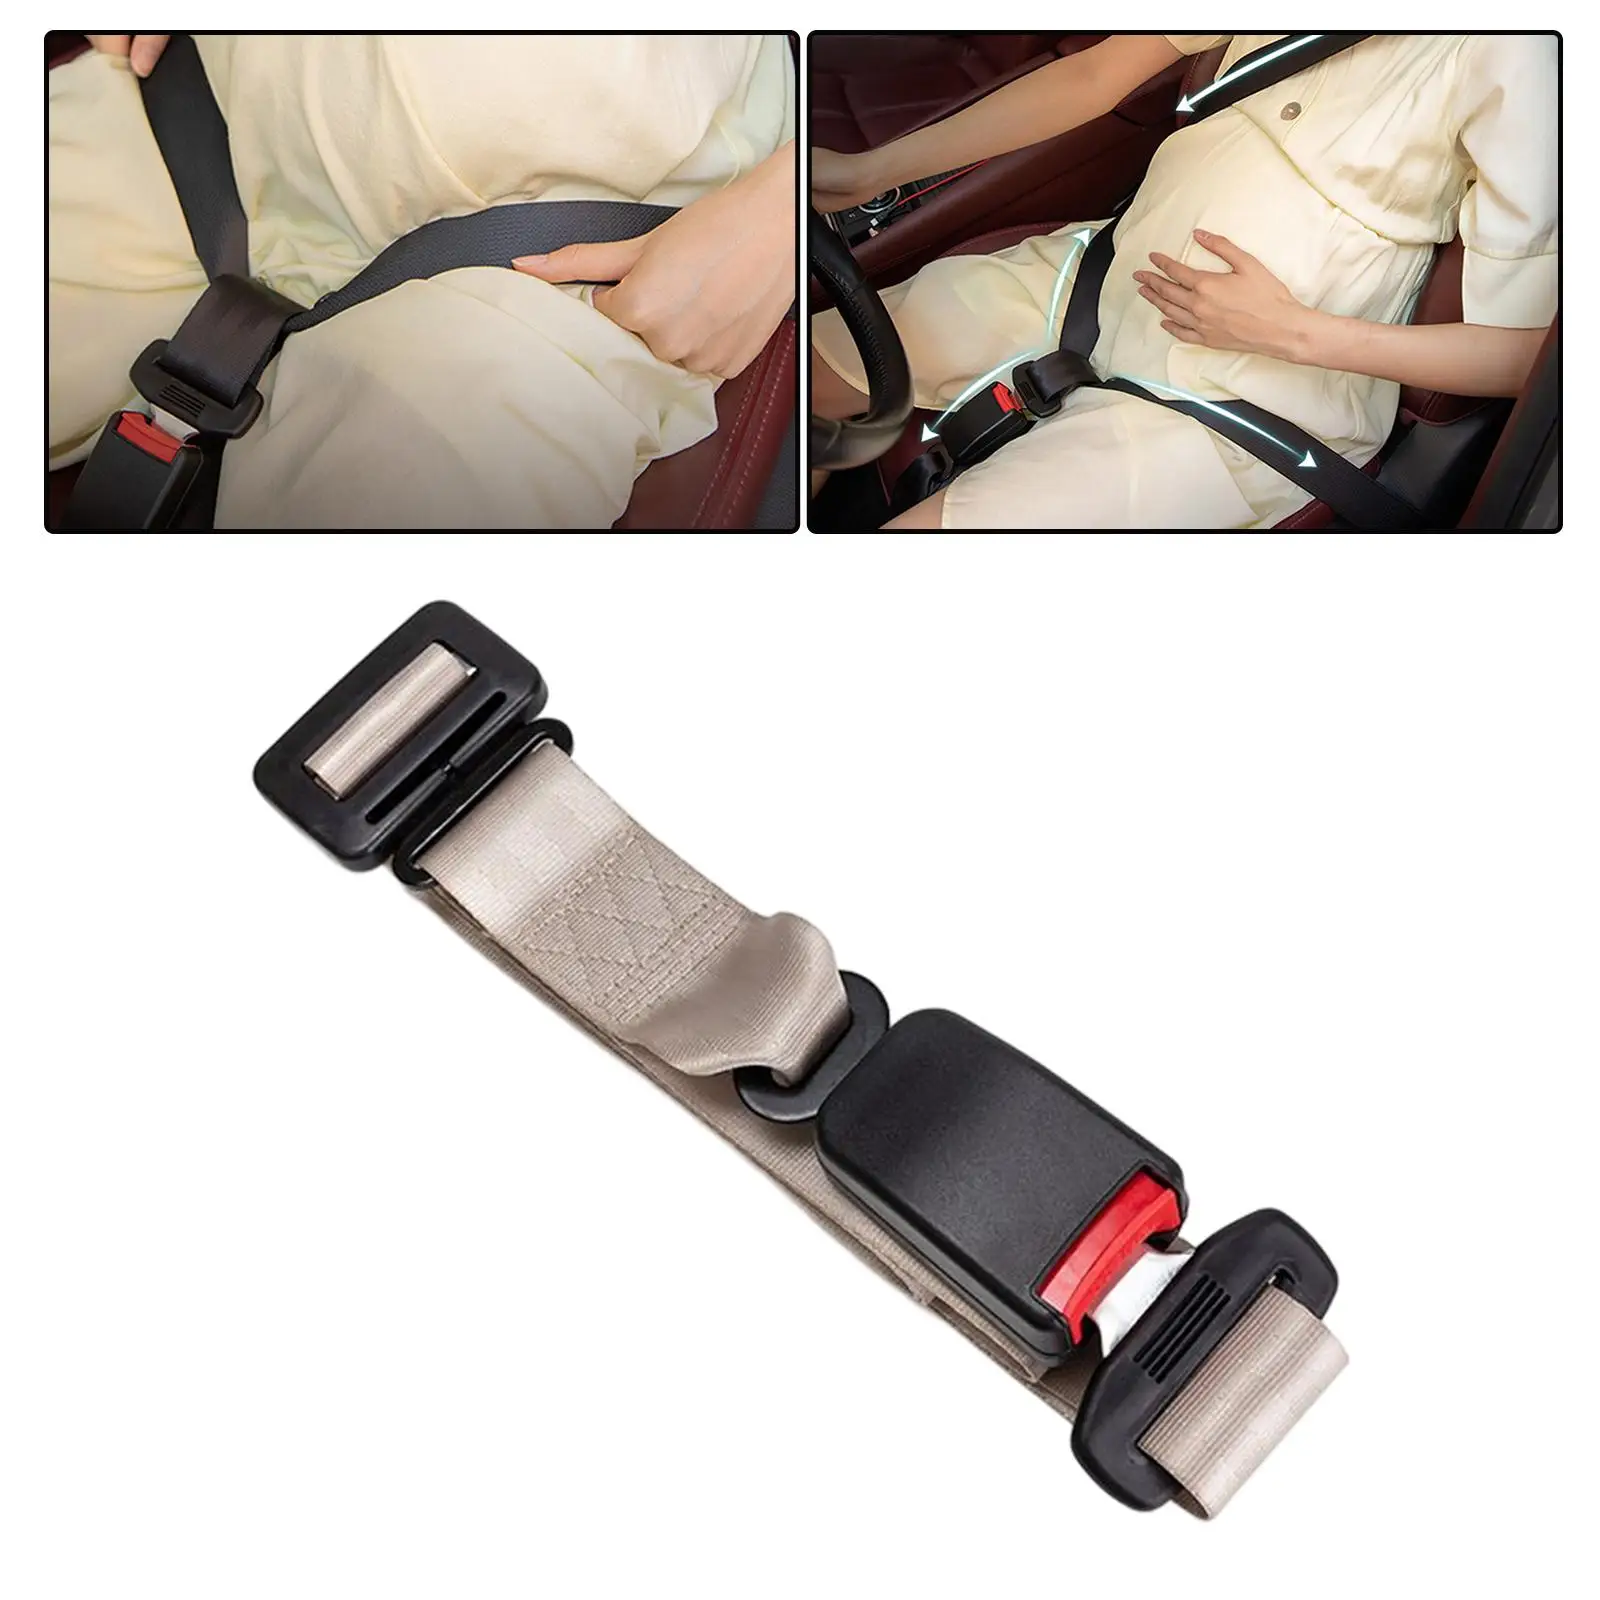 Pregnancy Seat Safety Belt Protect Unborn Baby Adjuster for Pregnancy Woman